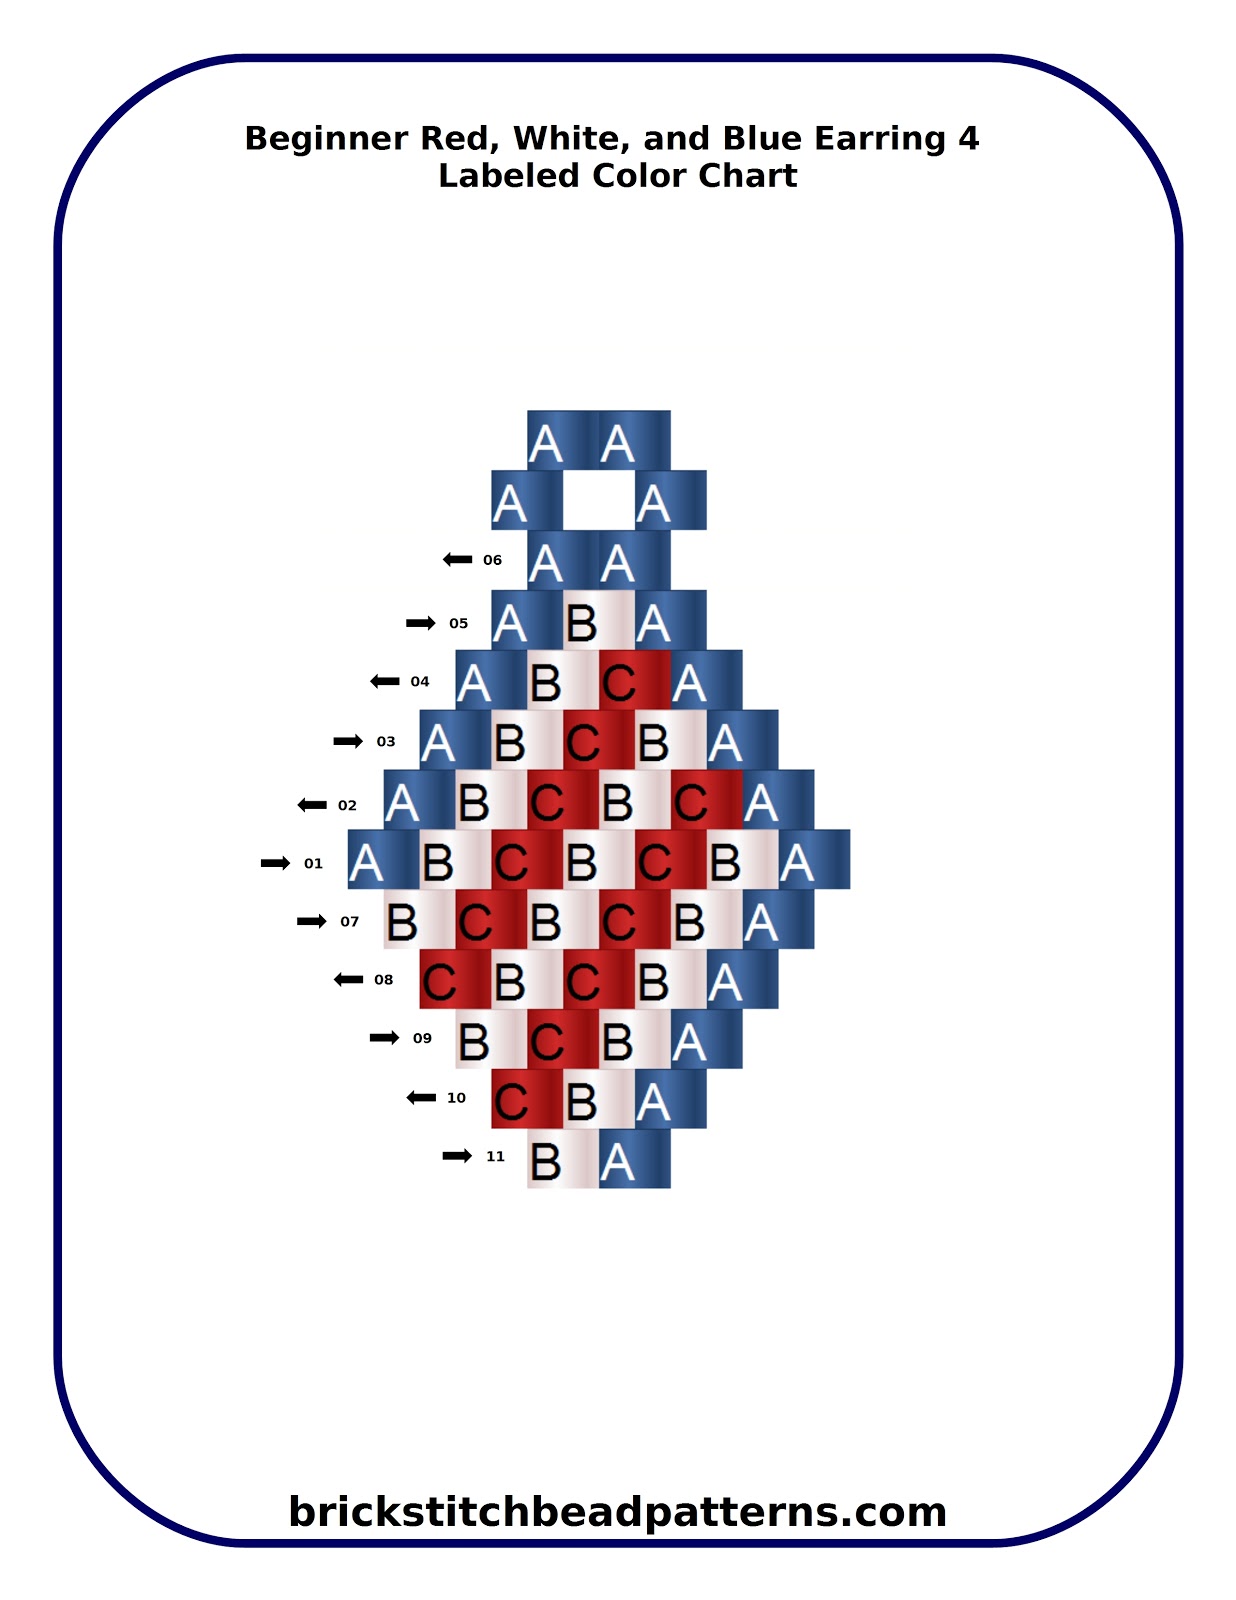 Download Brick Stitch Bead Patterns Journal: Beginner Red, White, and Blue Patriotic Earring 4 Free Brick ...